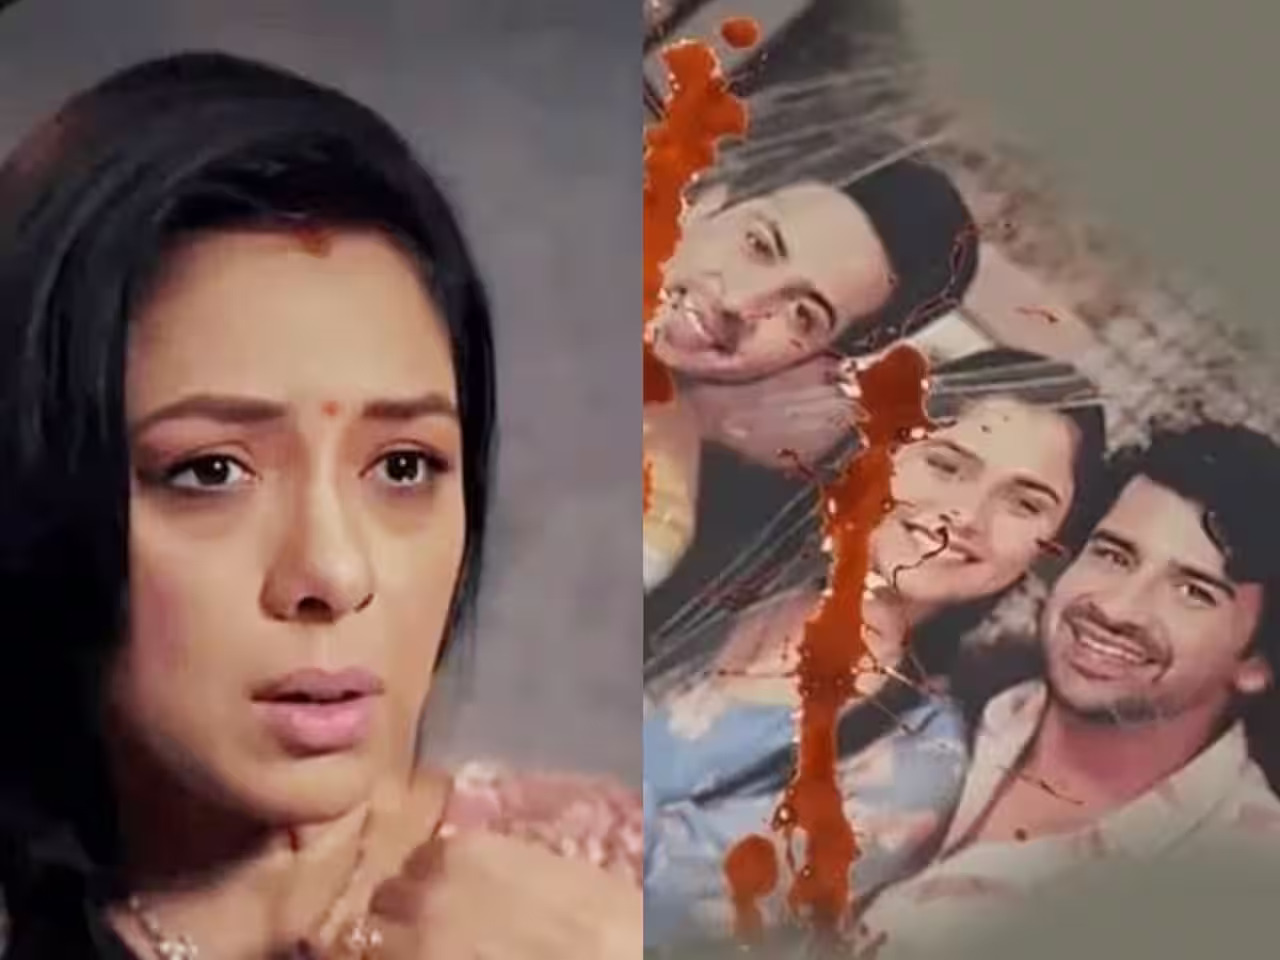 Anupamaa upcoming twist: Malti Devi killed her motherhood in her past and left her six-month-old child. Will she ever realize her mistakes?